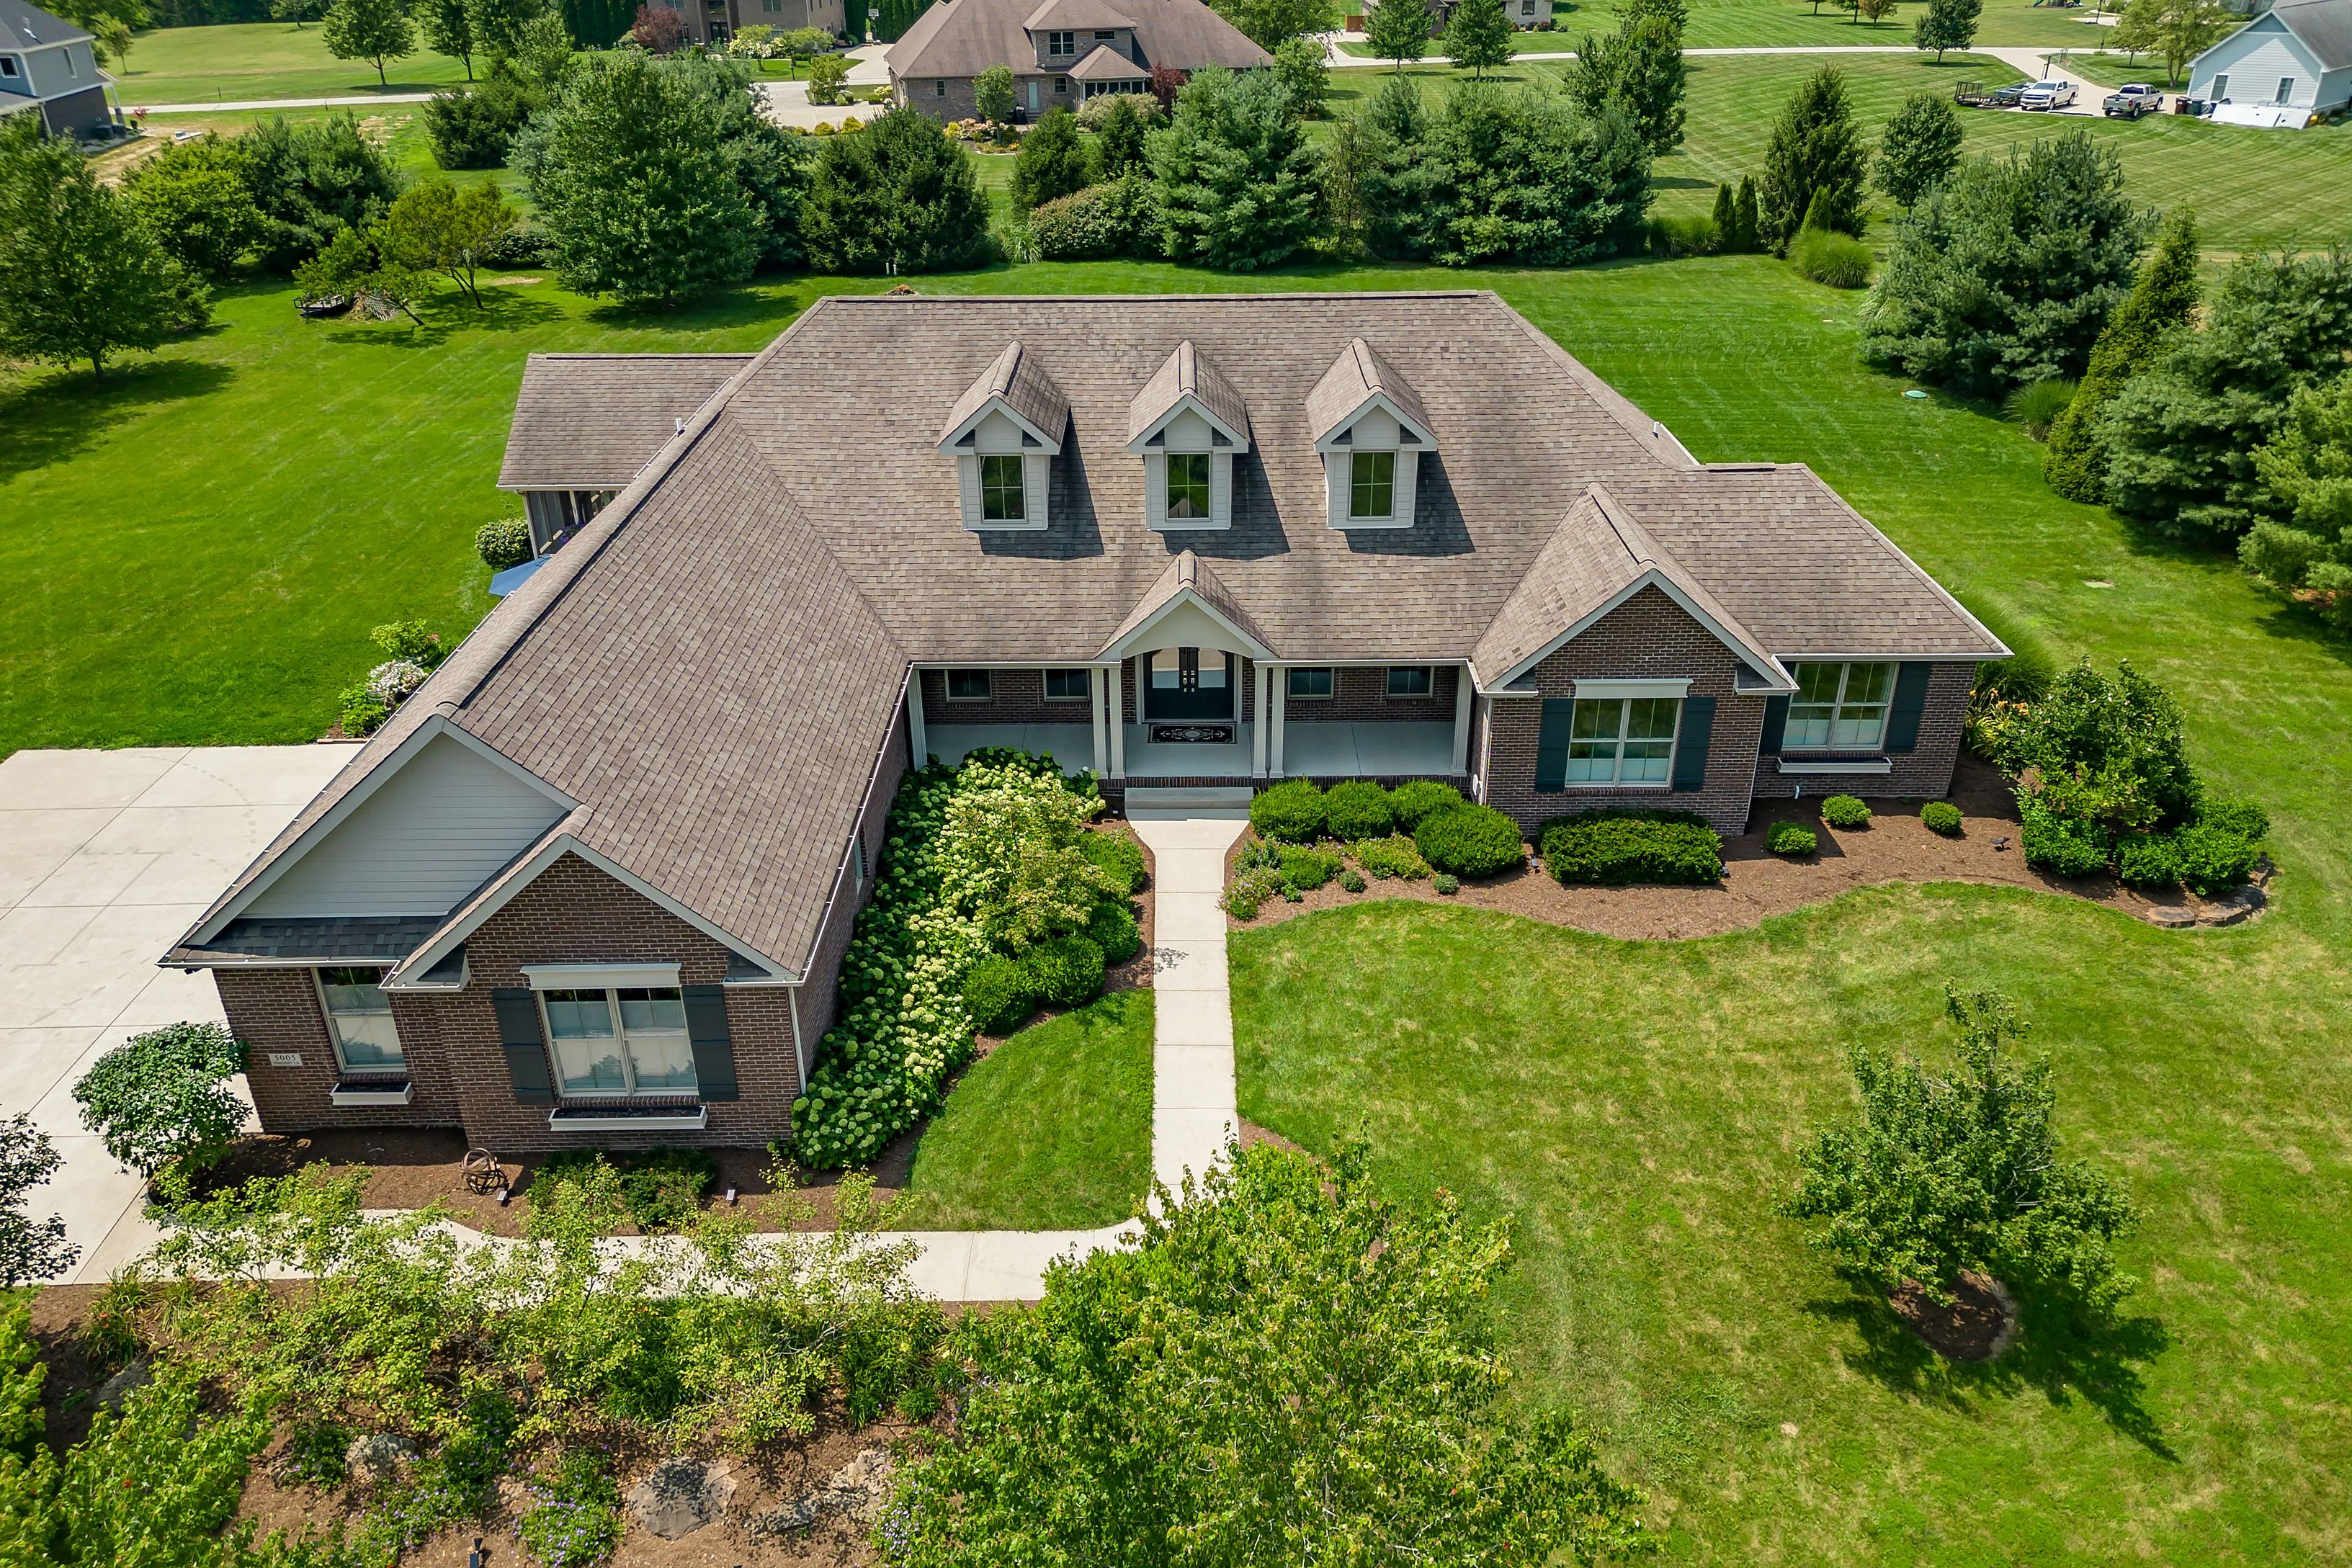 Aerial view of a large suburban home with a well-manicured lawn and landscaping.